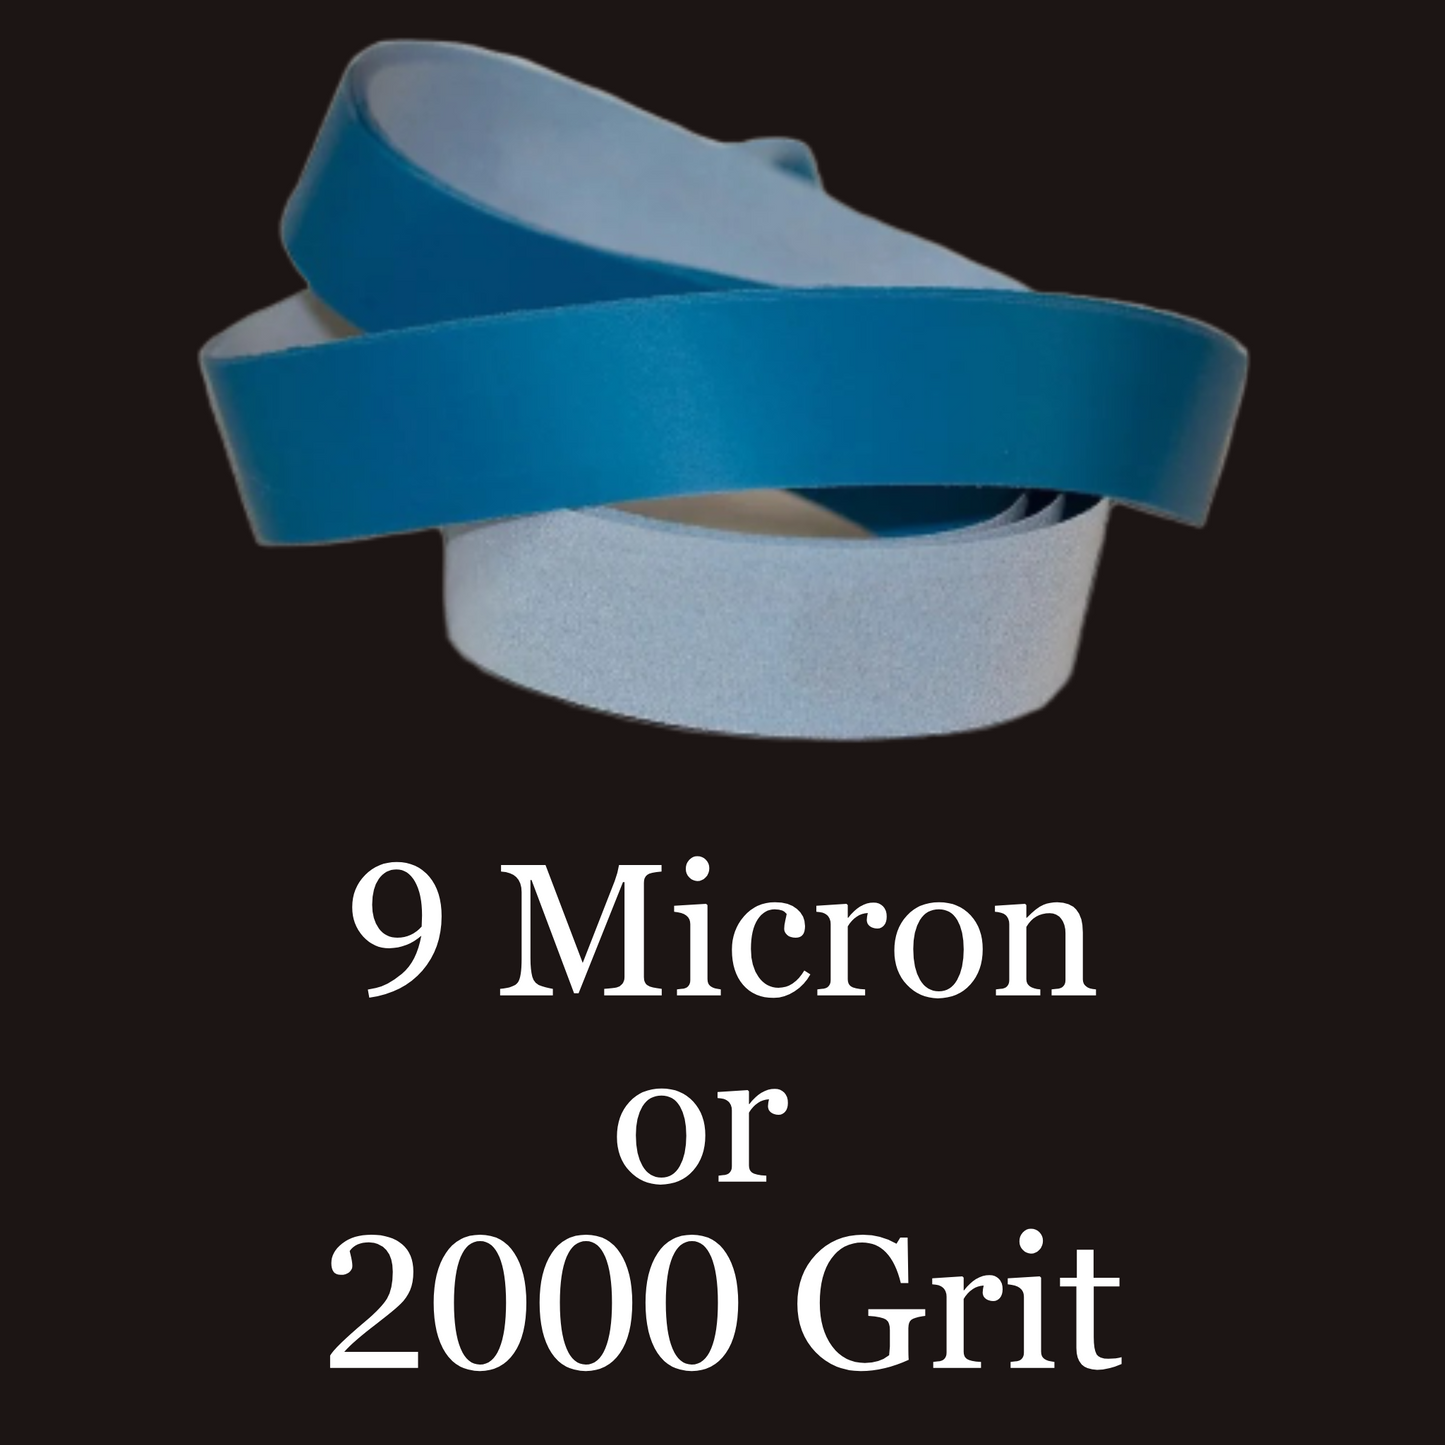 2” x 48” Film Micron Graded Finishing Belts 9 Micron or 2000 Grit